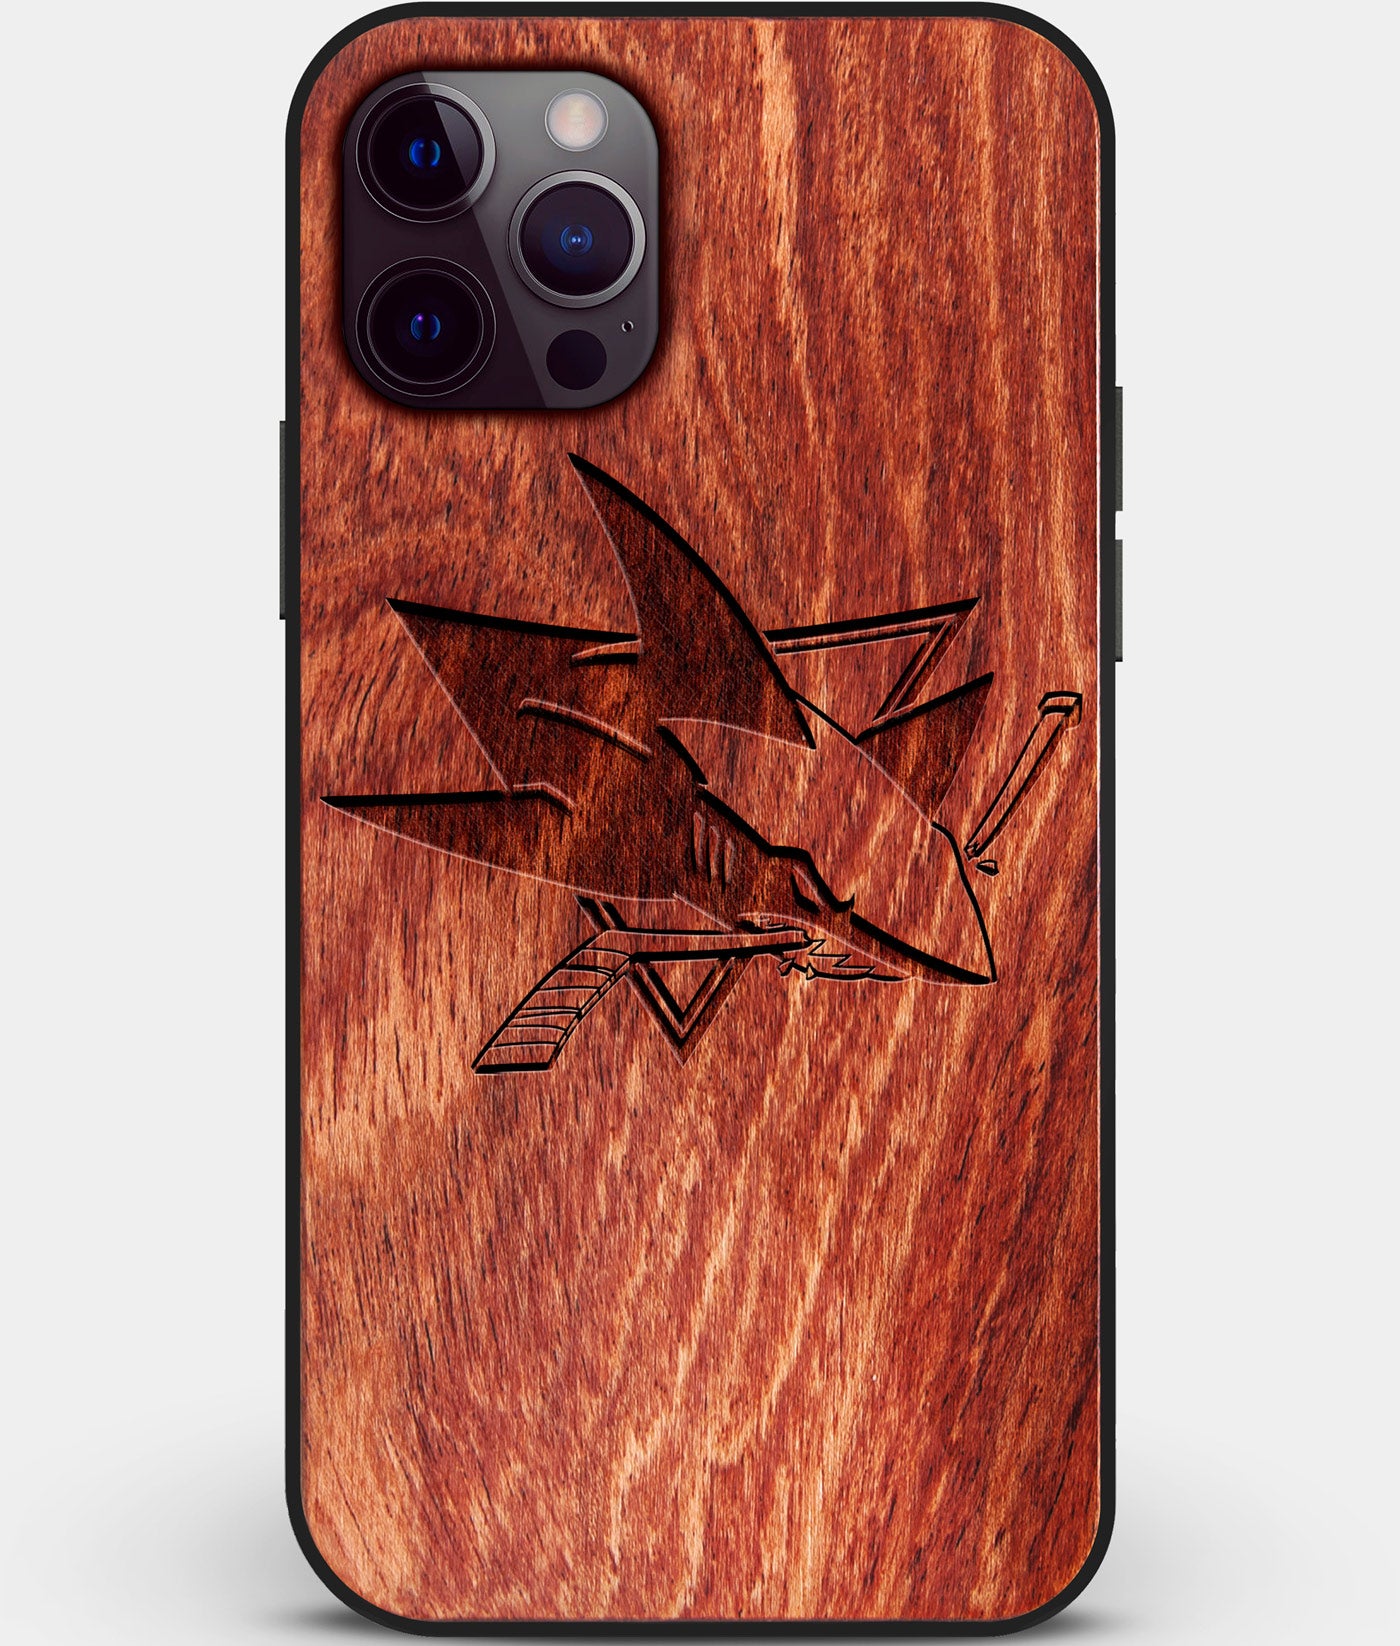 Custom Carved Wood San Jose Sharks iPhone 12 Pro Case | Personalized Mahogany Wood San Jose Sharks Cover, Birthday Gift, Gifts For Him, Monogrammed Gift For Fan | by Engraved In Nature